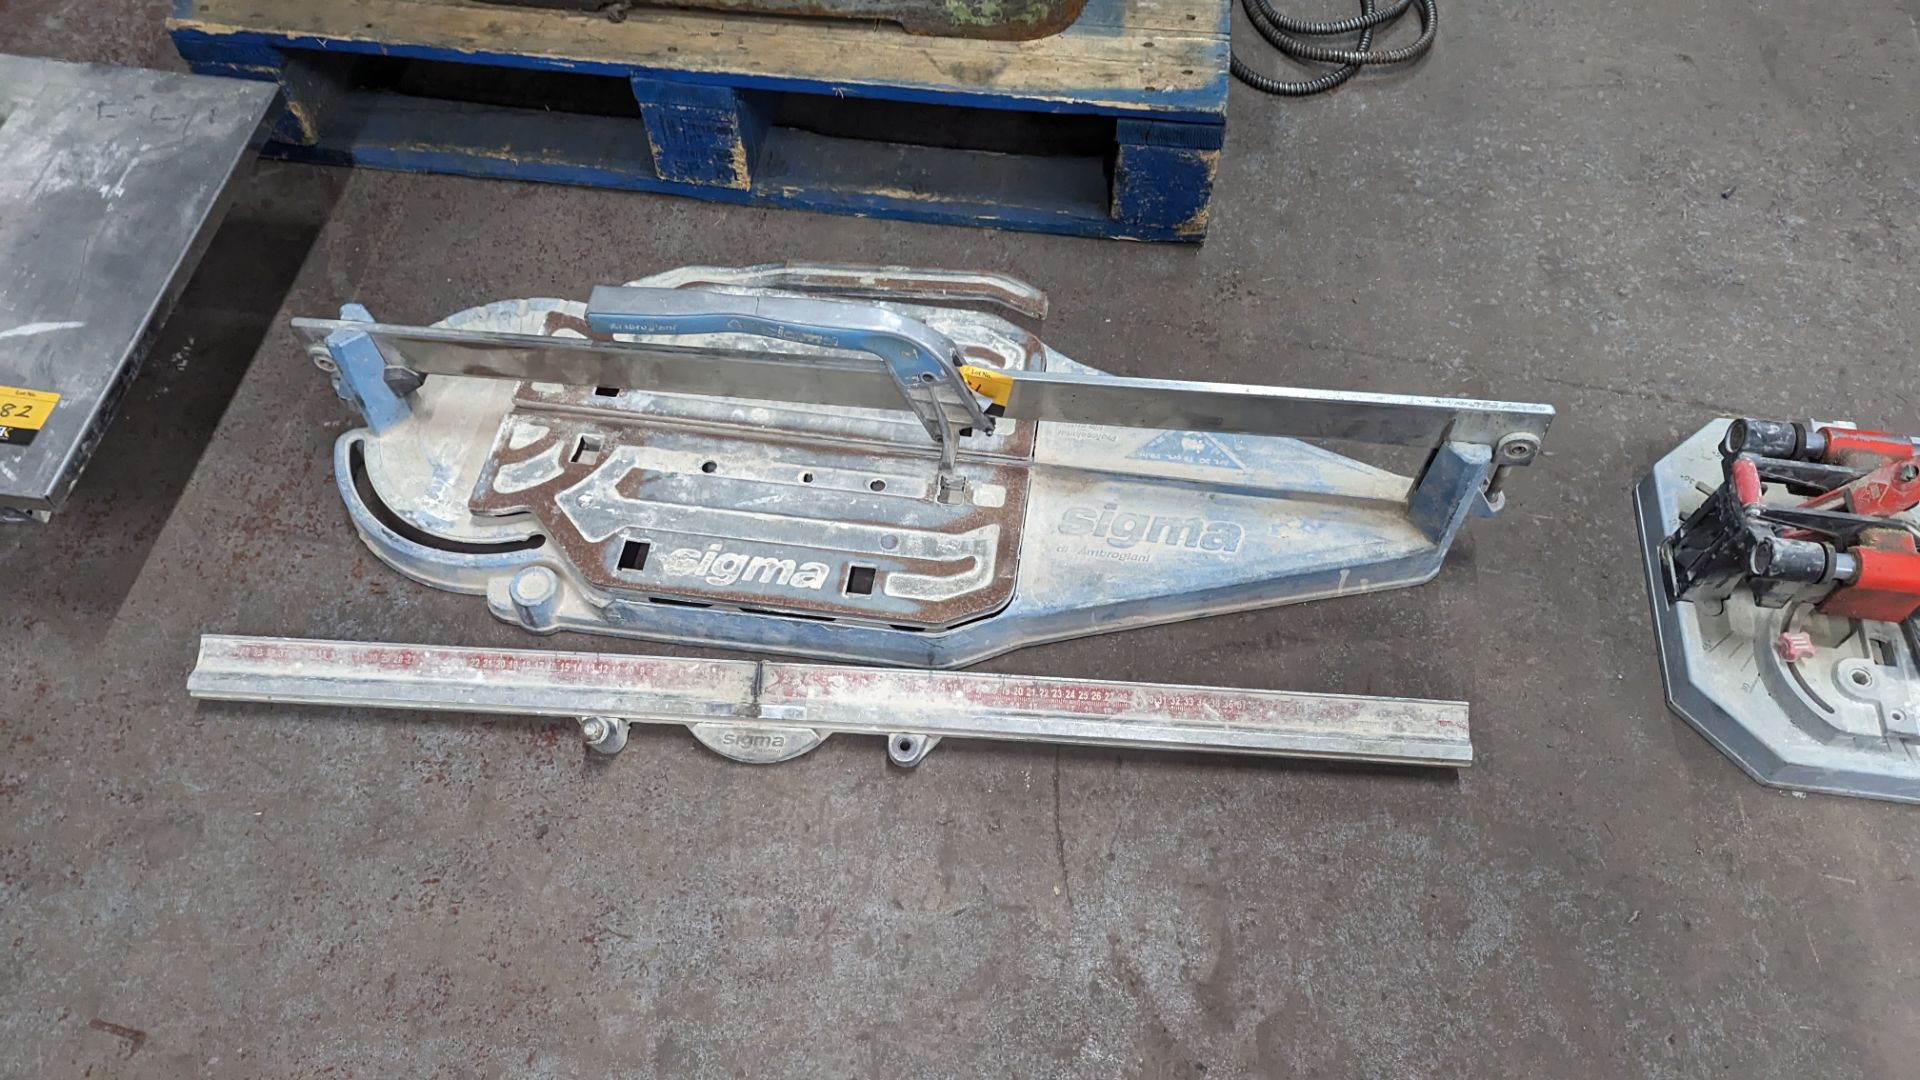 Sigma tile cutter - Image 2 of 4